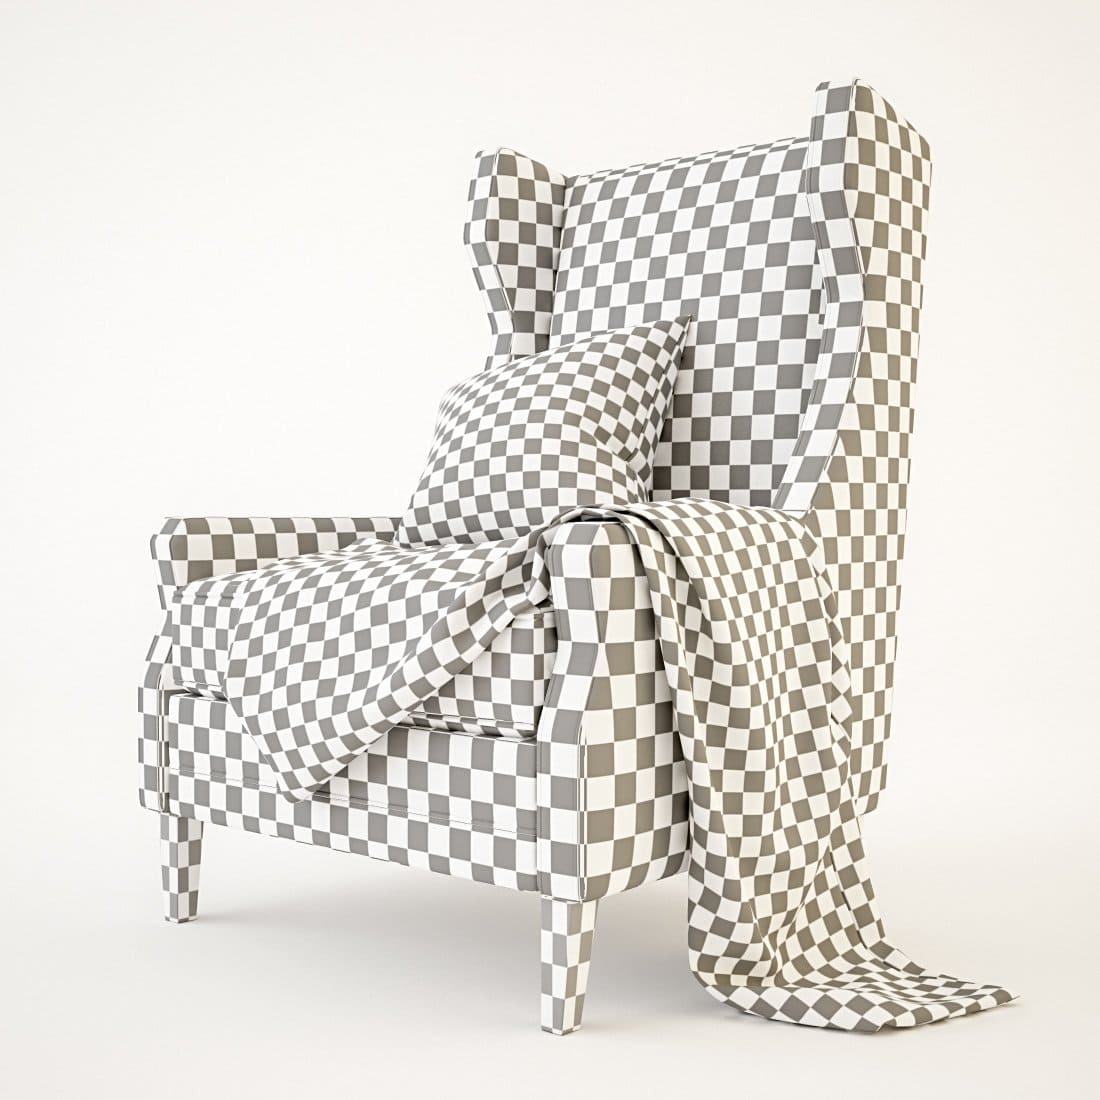 Rooma lucas checkerboard armchairs with a pillow and blanket with a similar pattern.